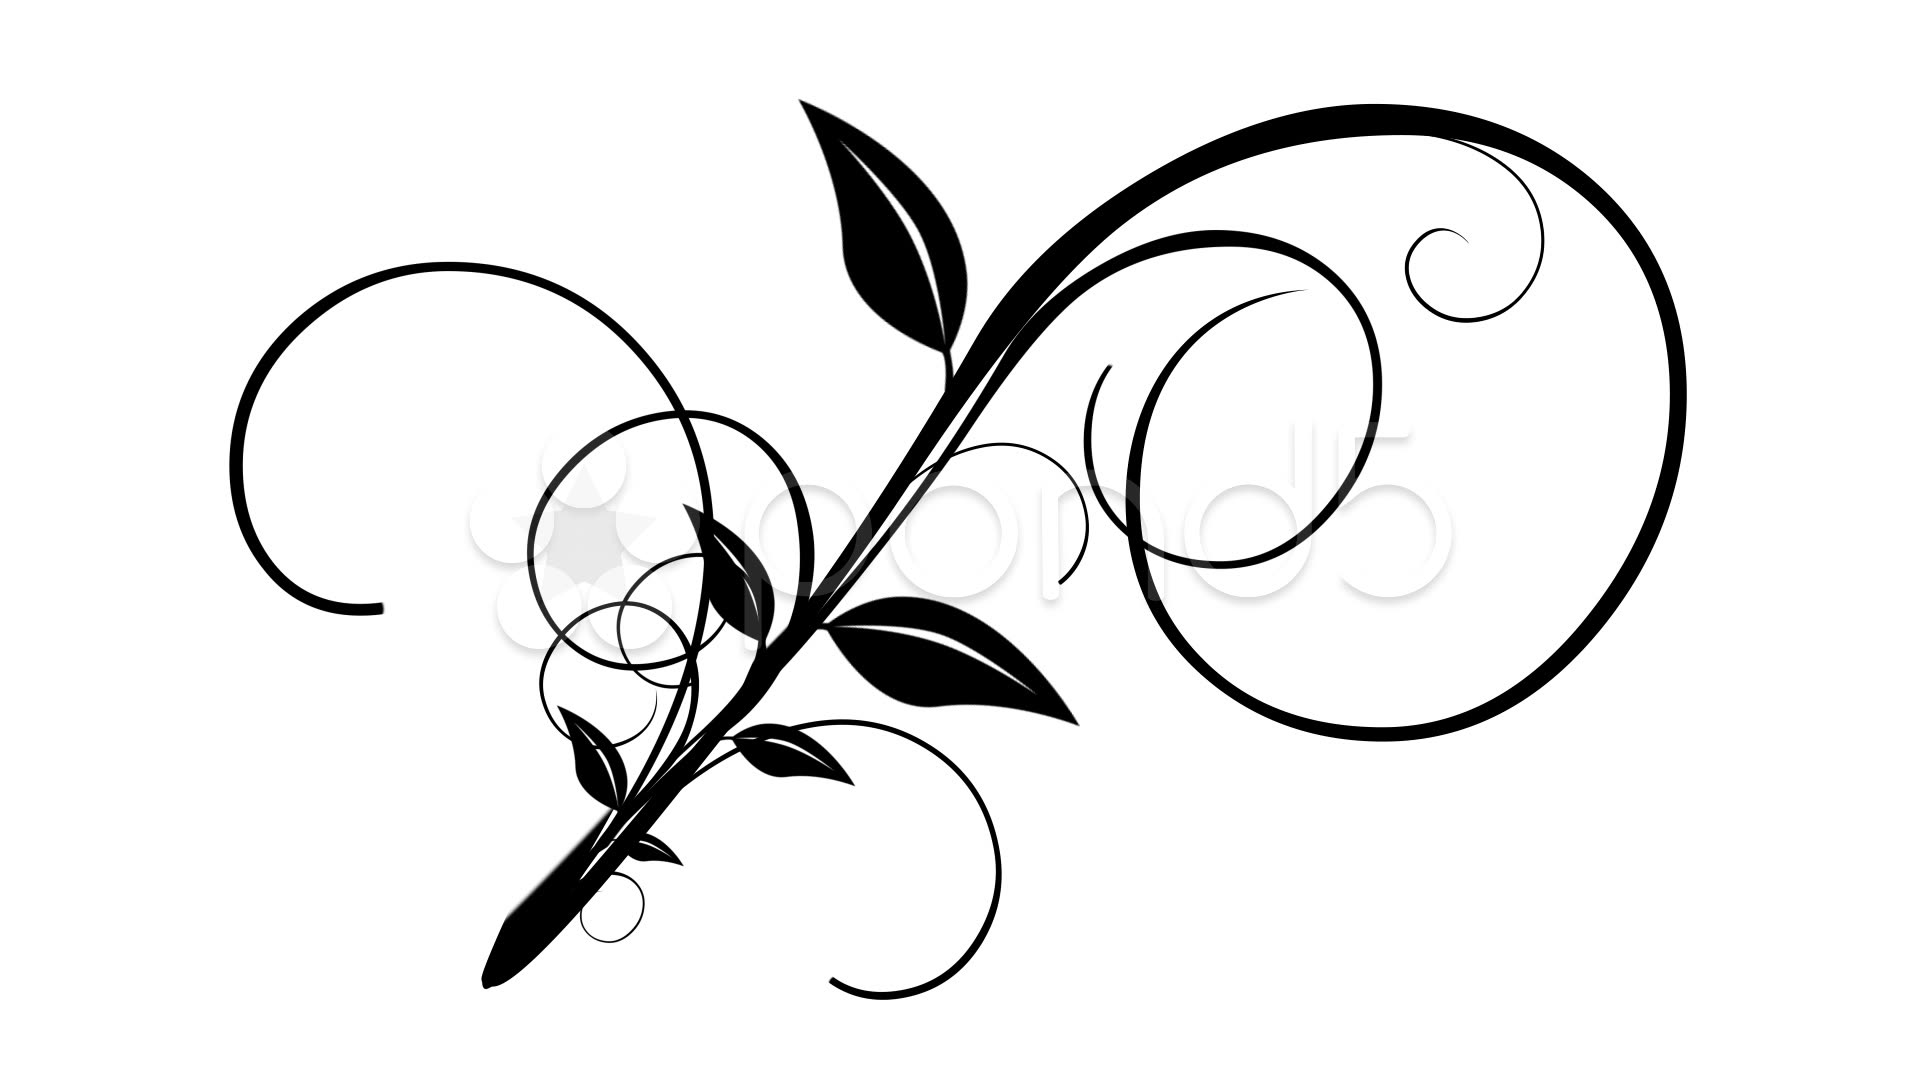 free clip art leaves and vines - photo #48